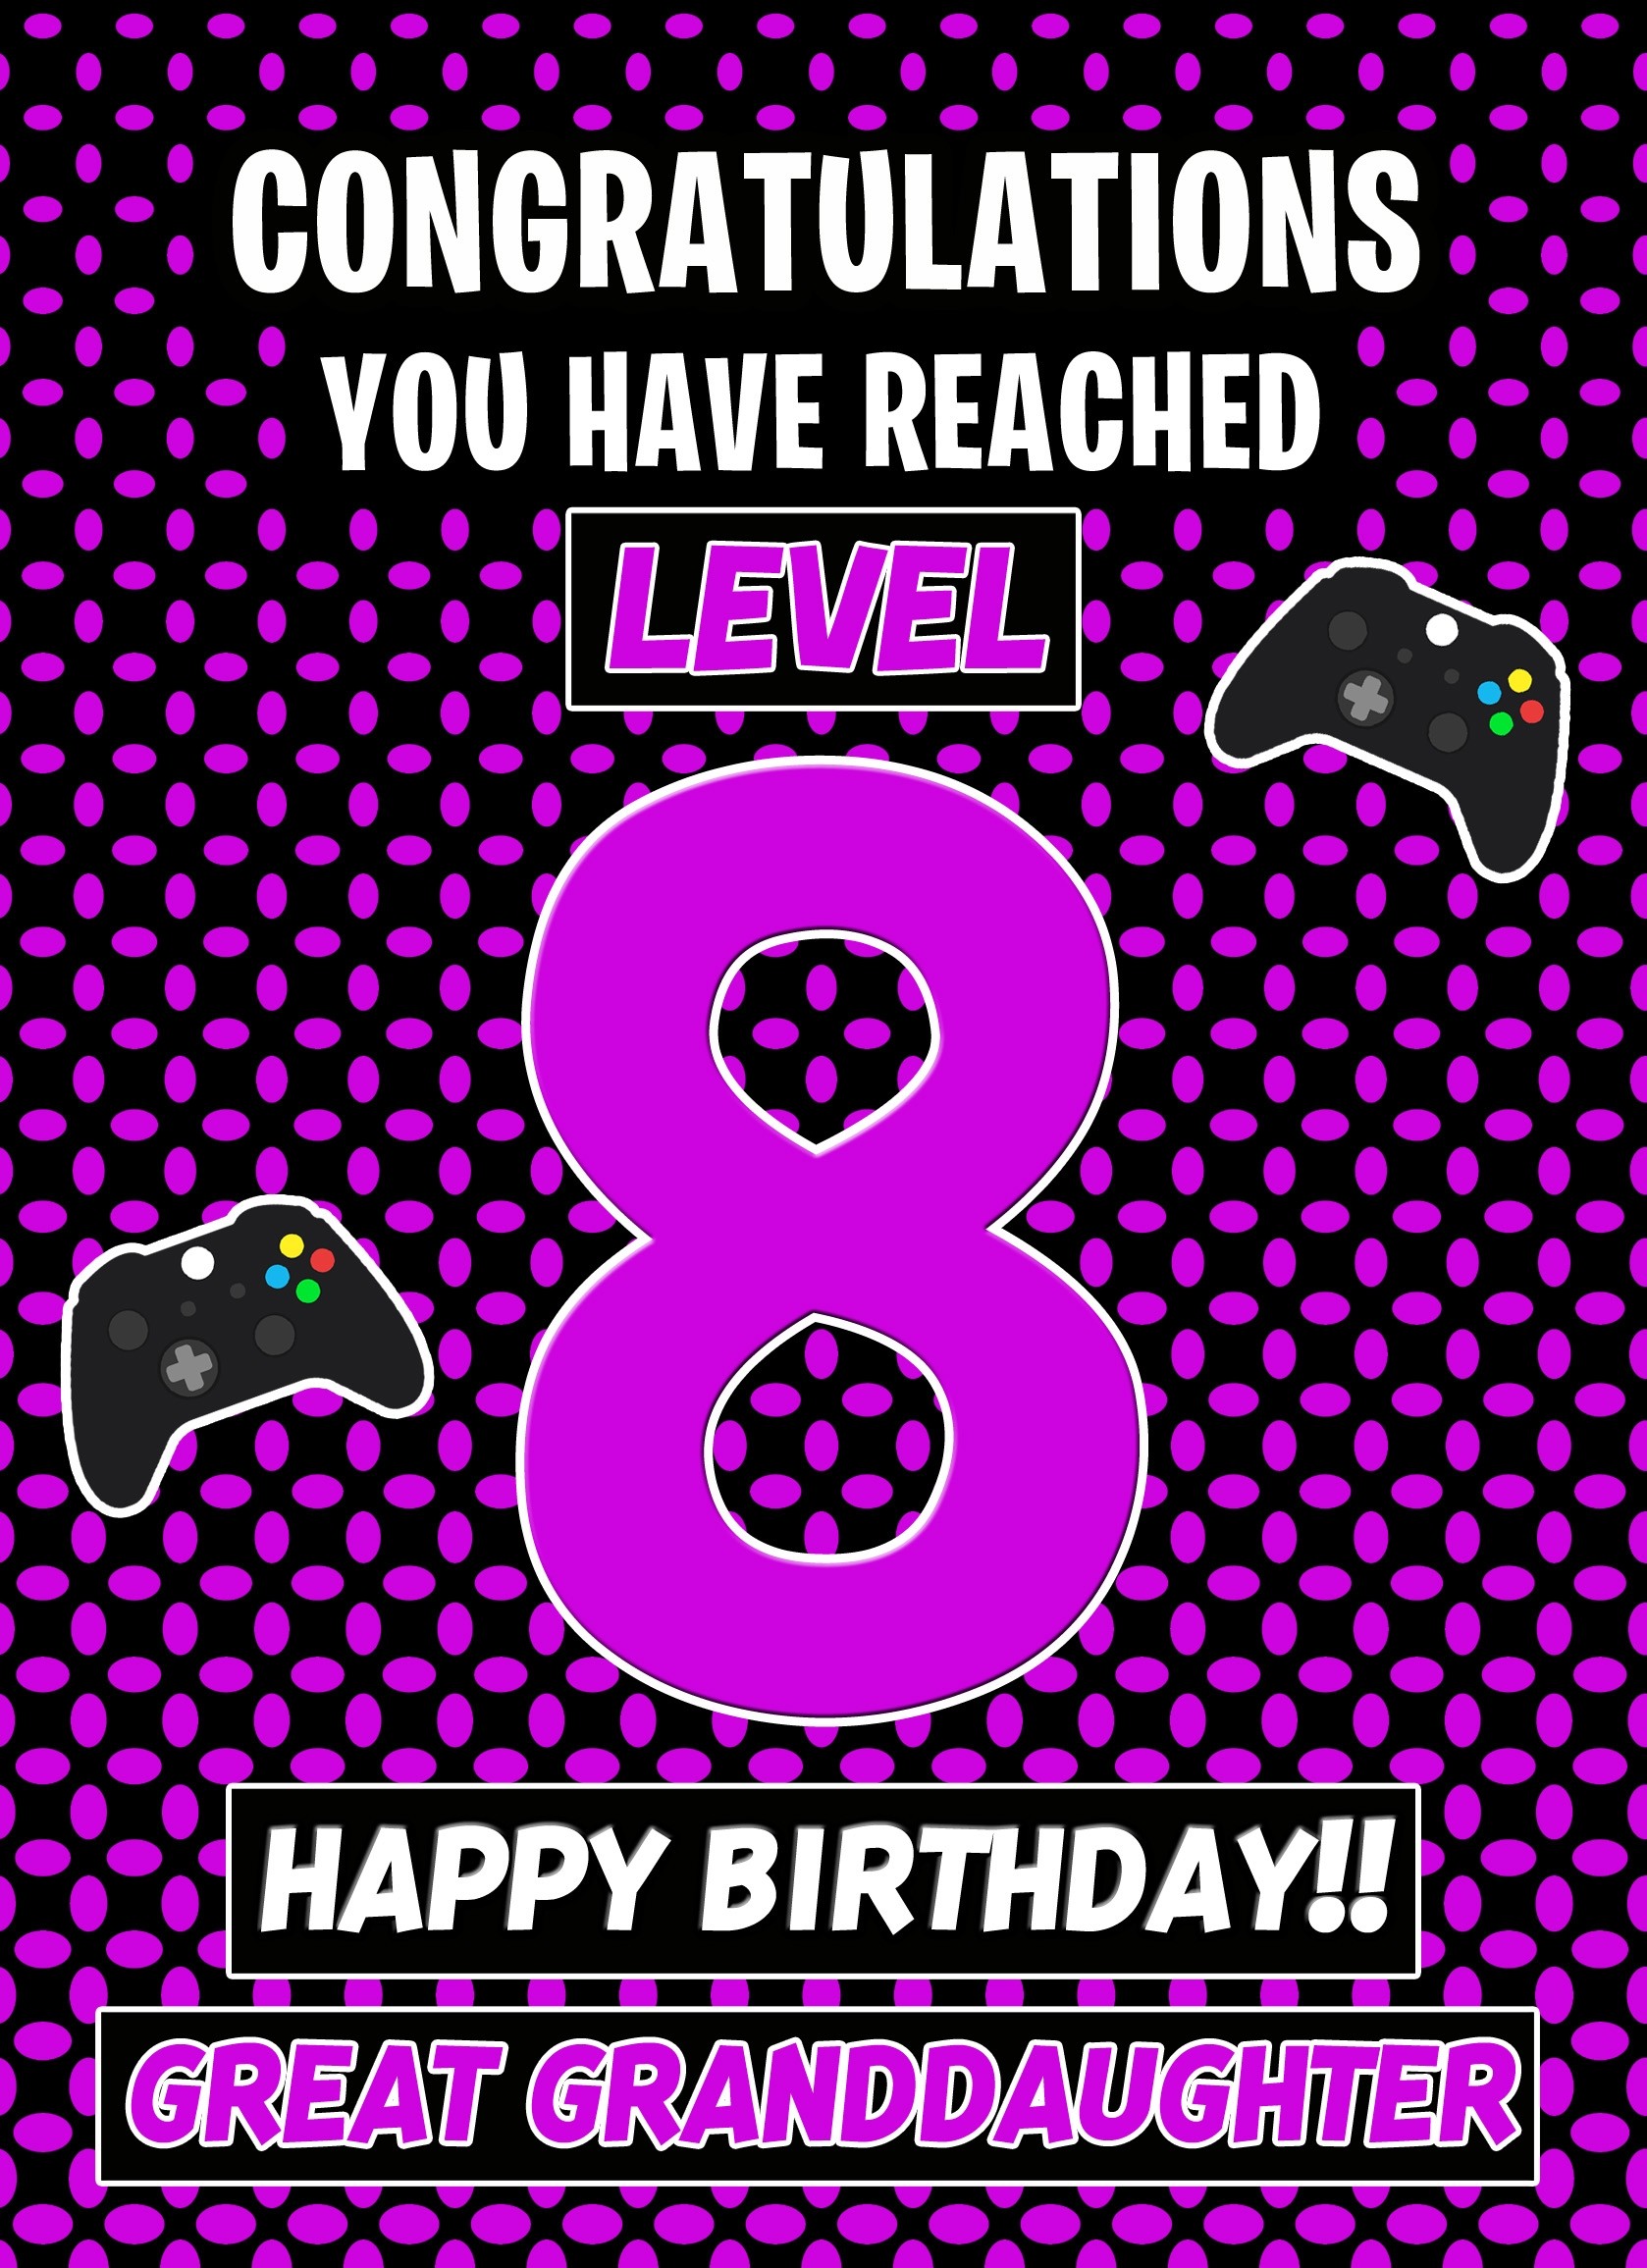 Great Granddaughter 8th Birthday Card (Level Up Gamer)